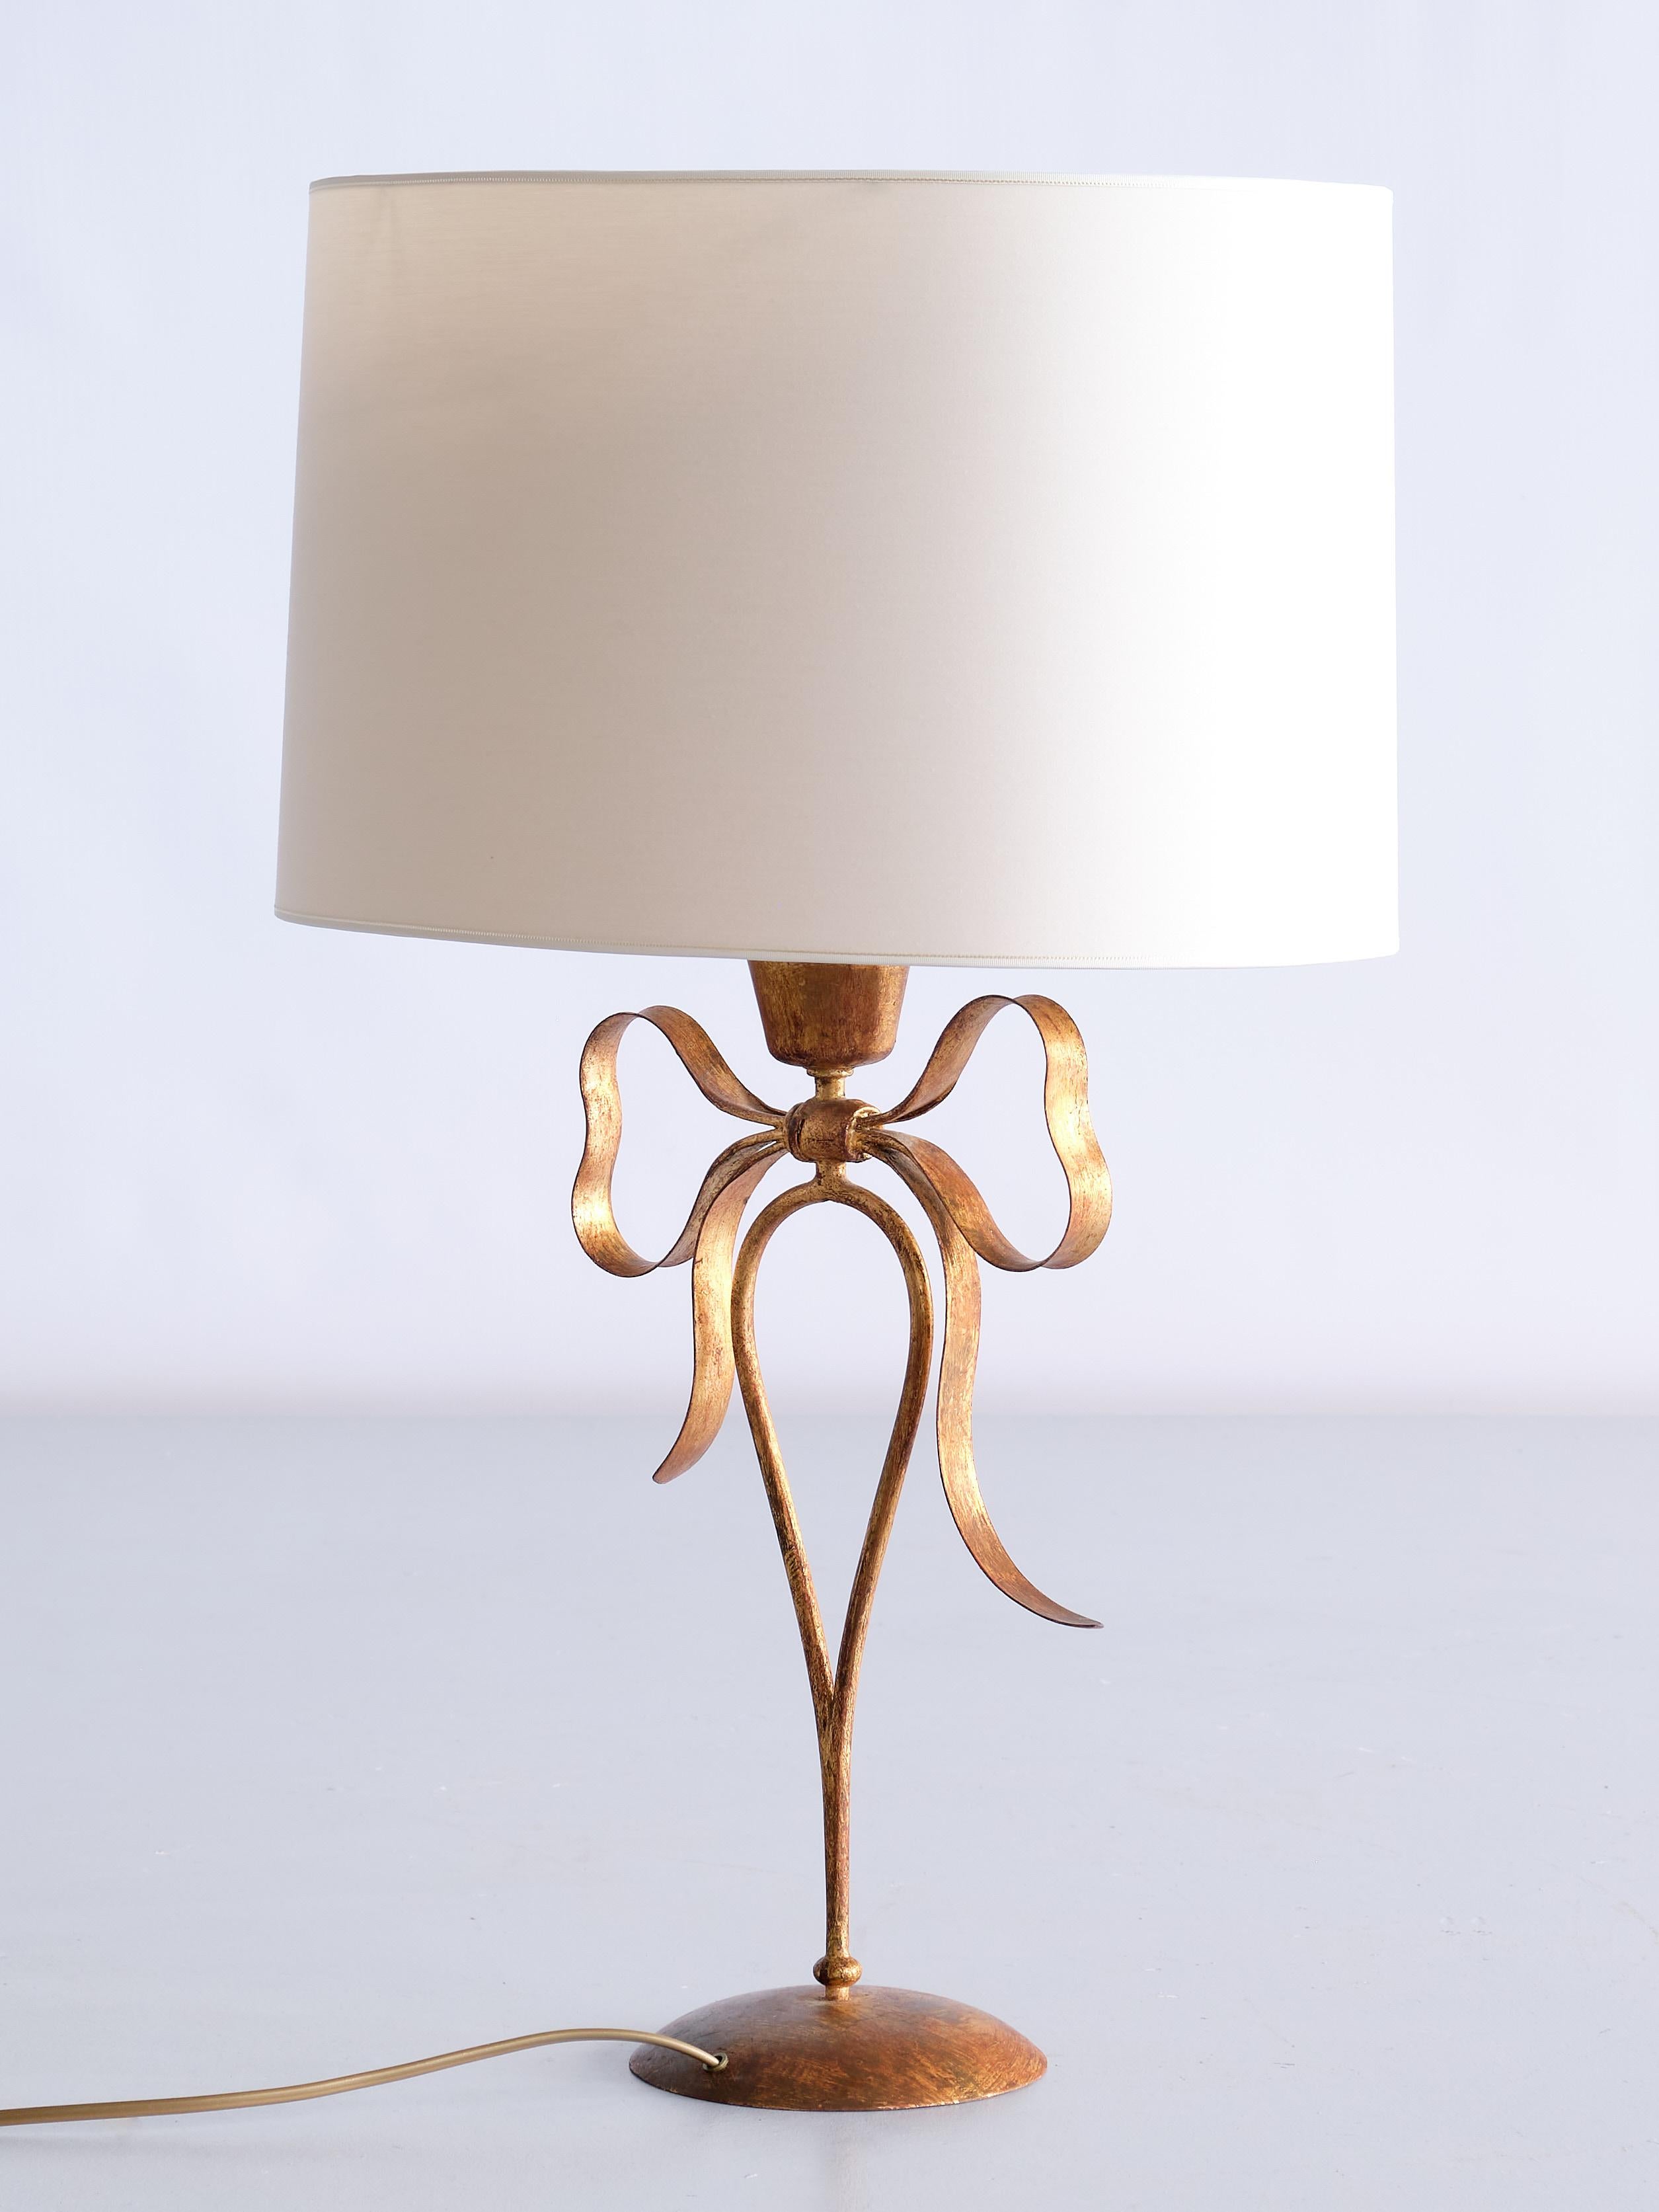 Mid-20th Century Pair of Gilded Bow Shaped Table Lamps by Mingazzi Bologna, Italy, 1950s